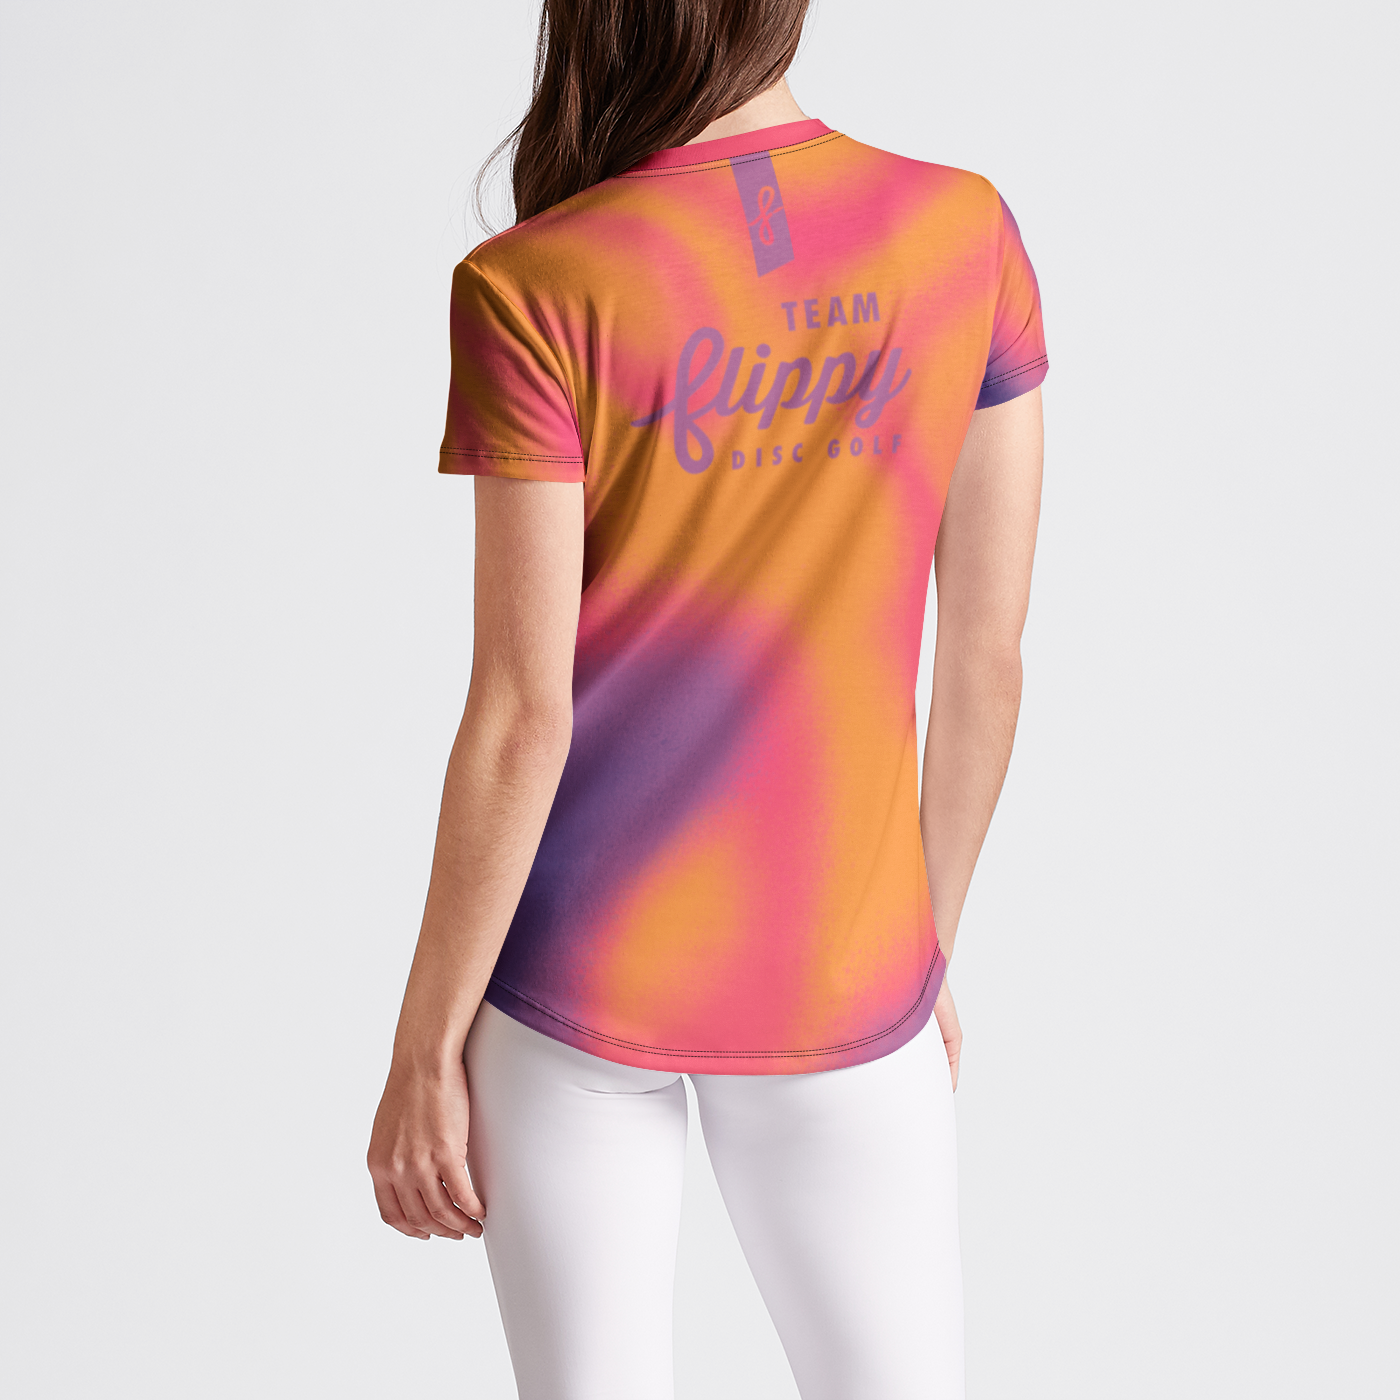 WOMEN'S SOLPRO TEAM HOT ROUND THERMAL